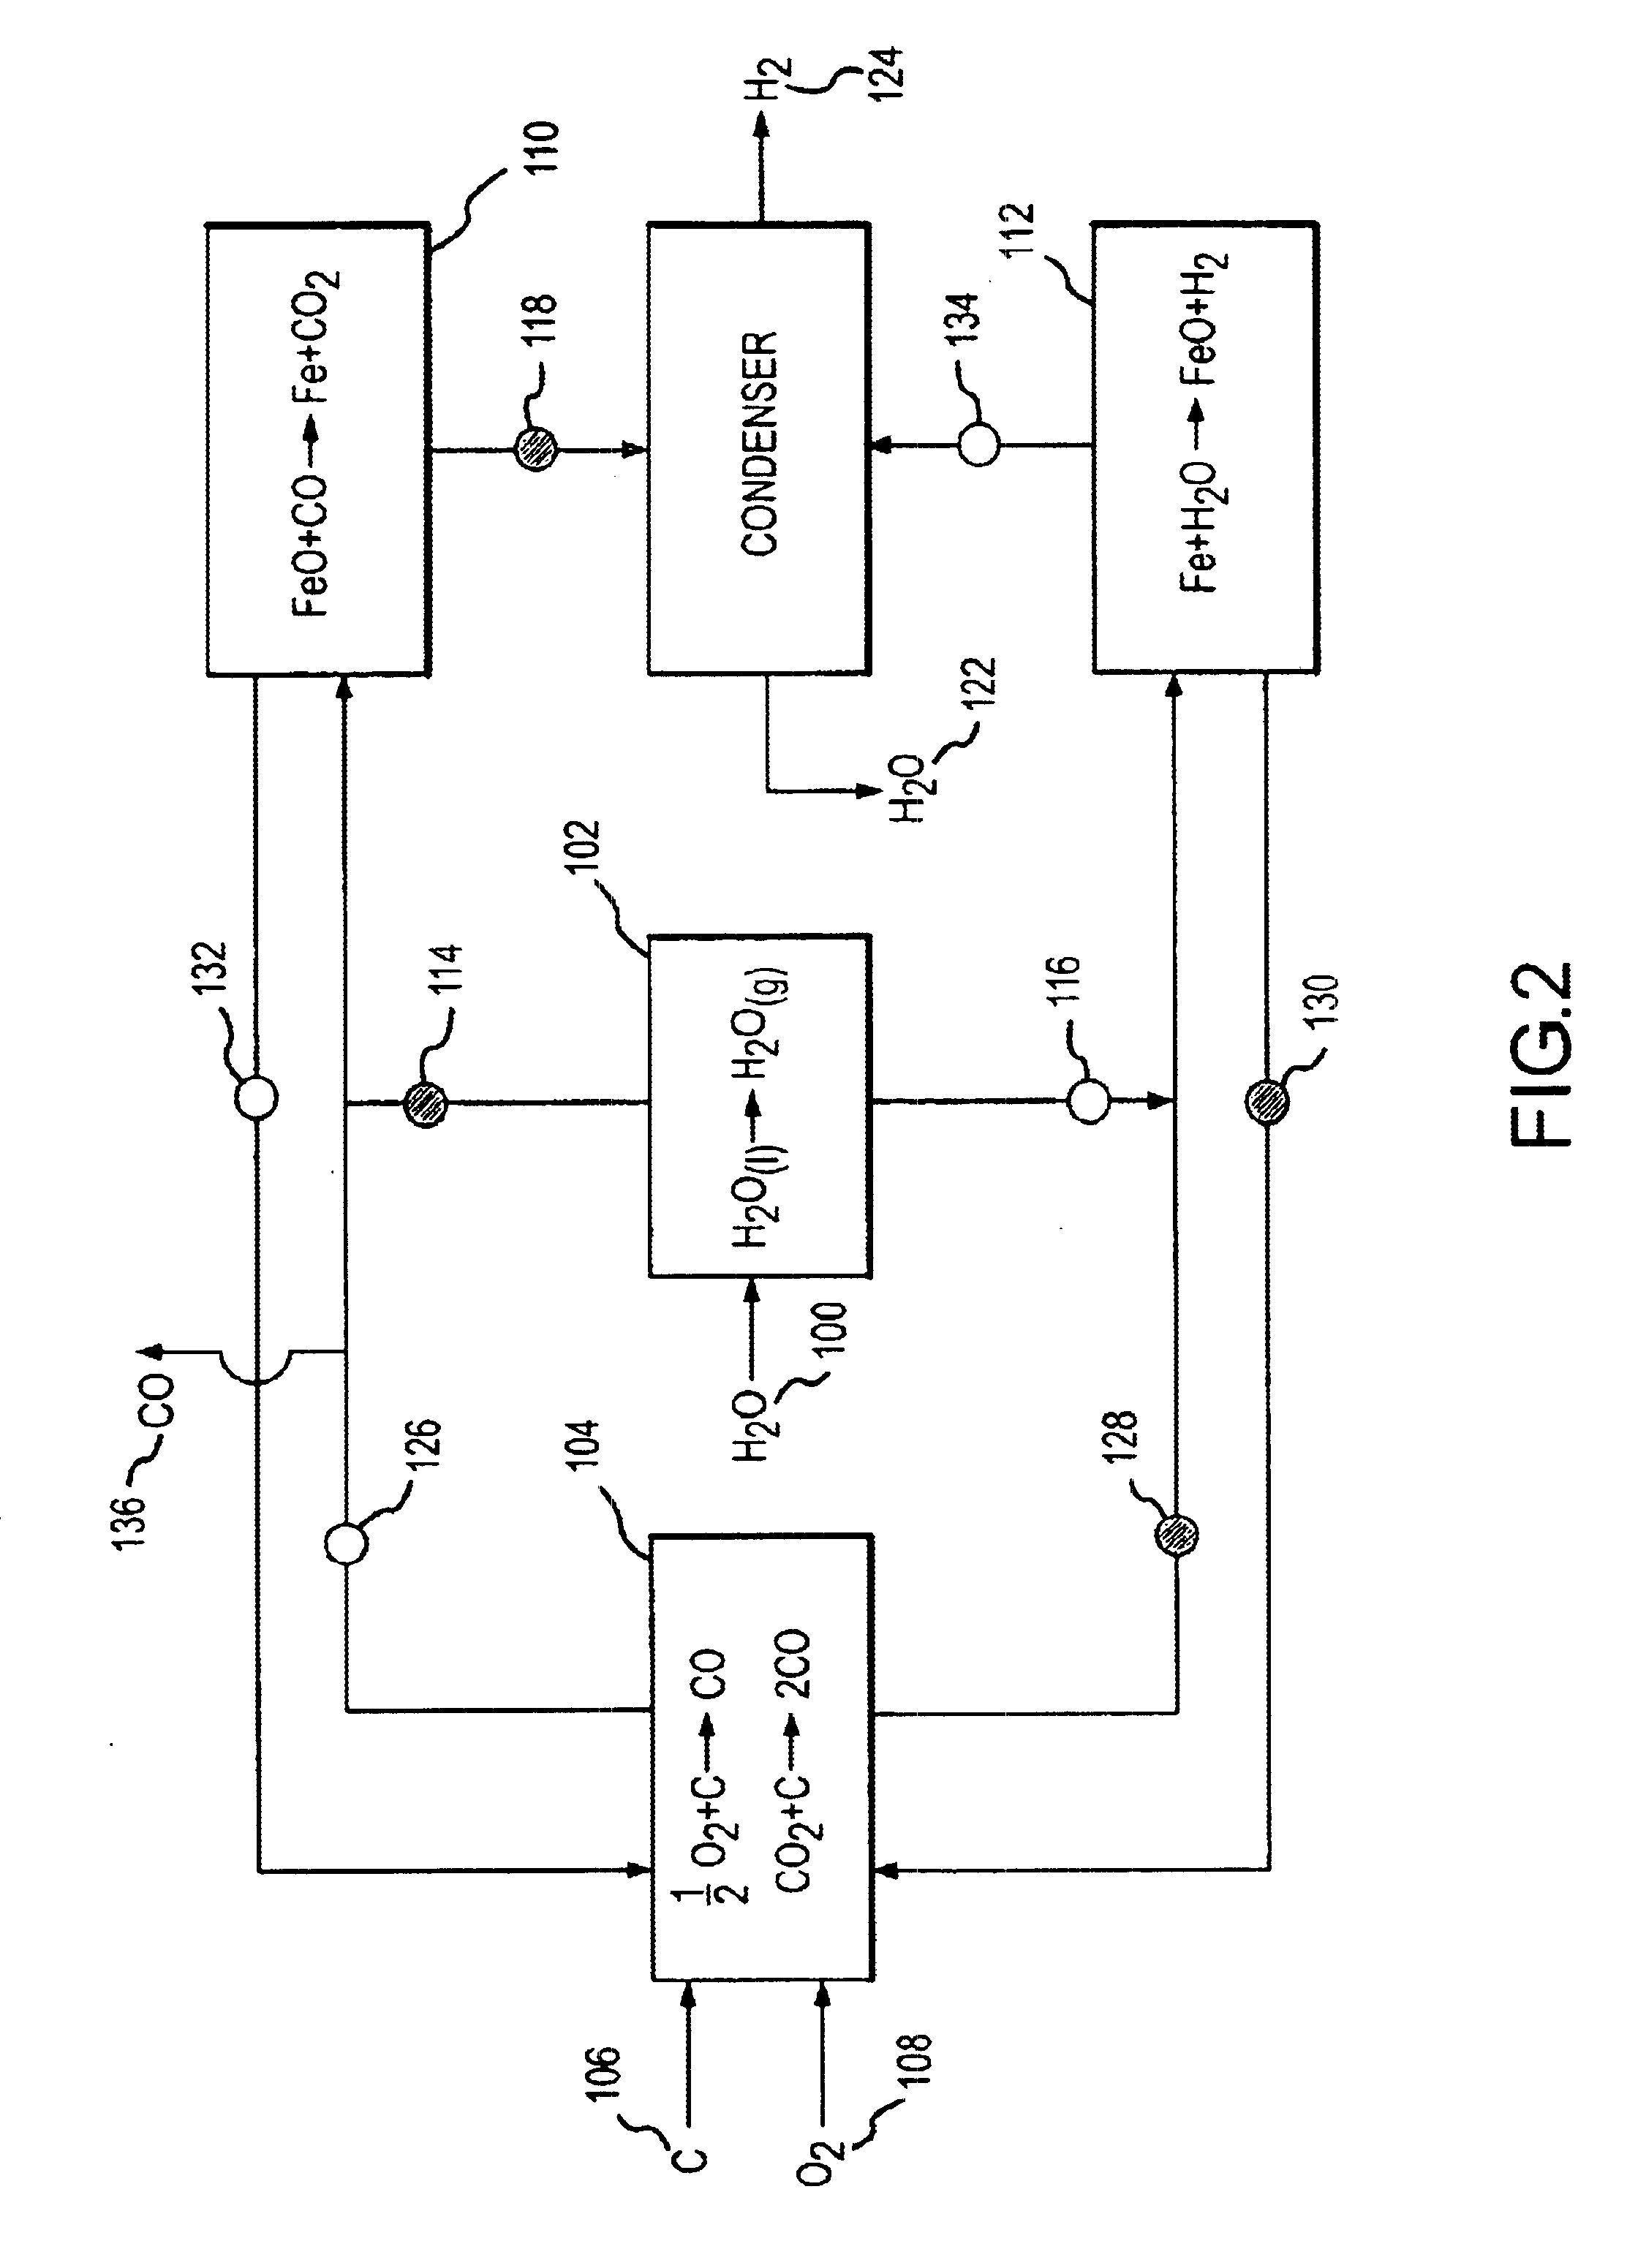 Method and apparatus for the production of hydrogen gas